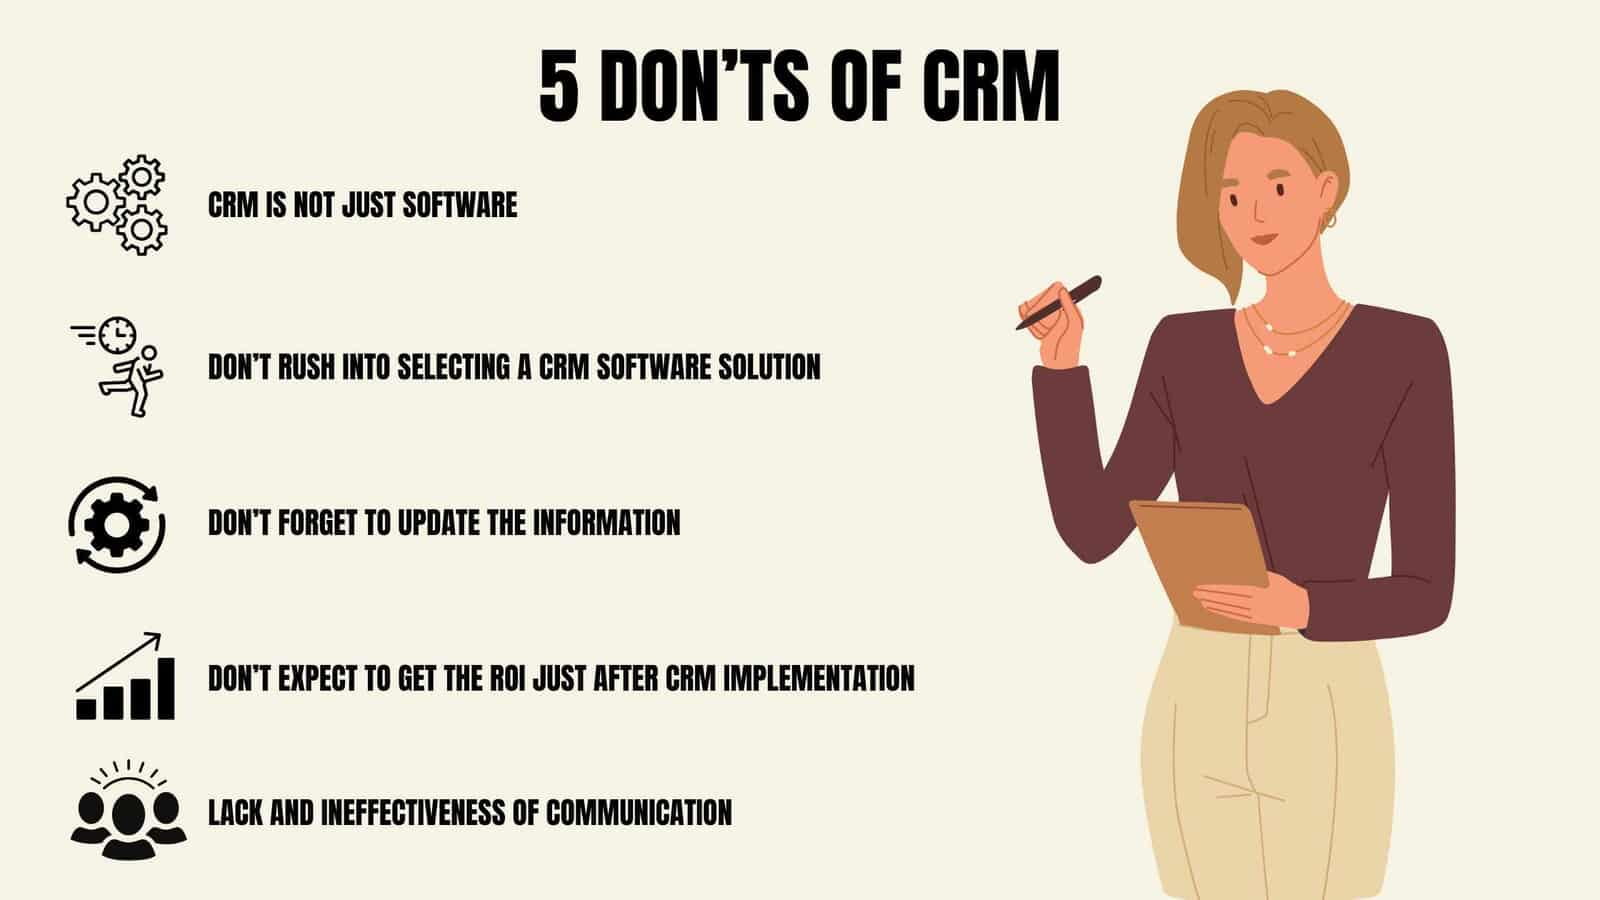 5 Don'ts of CRM